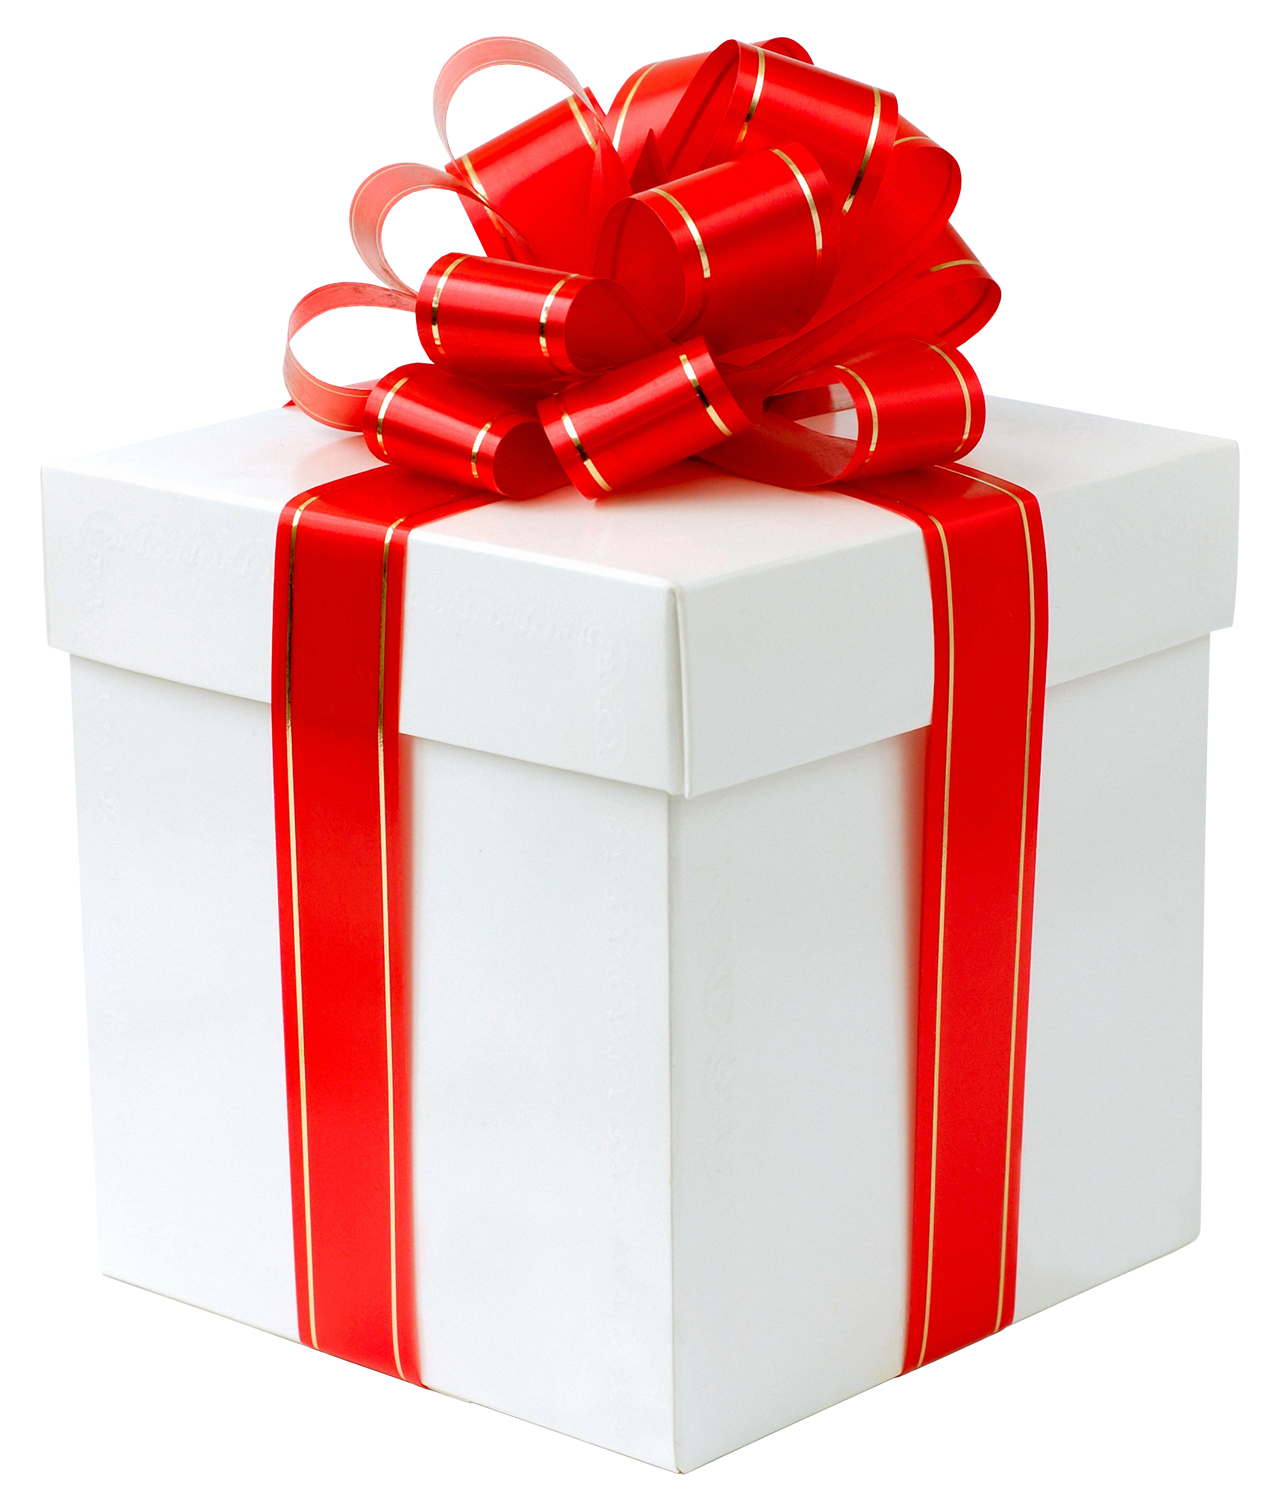 gifts clipart pile gift